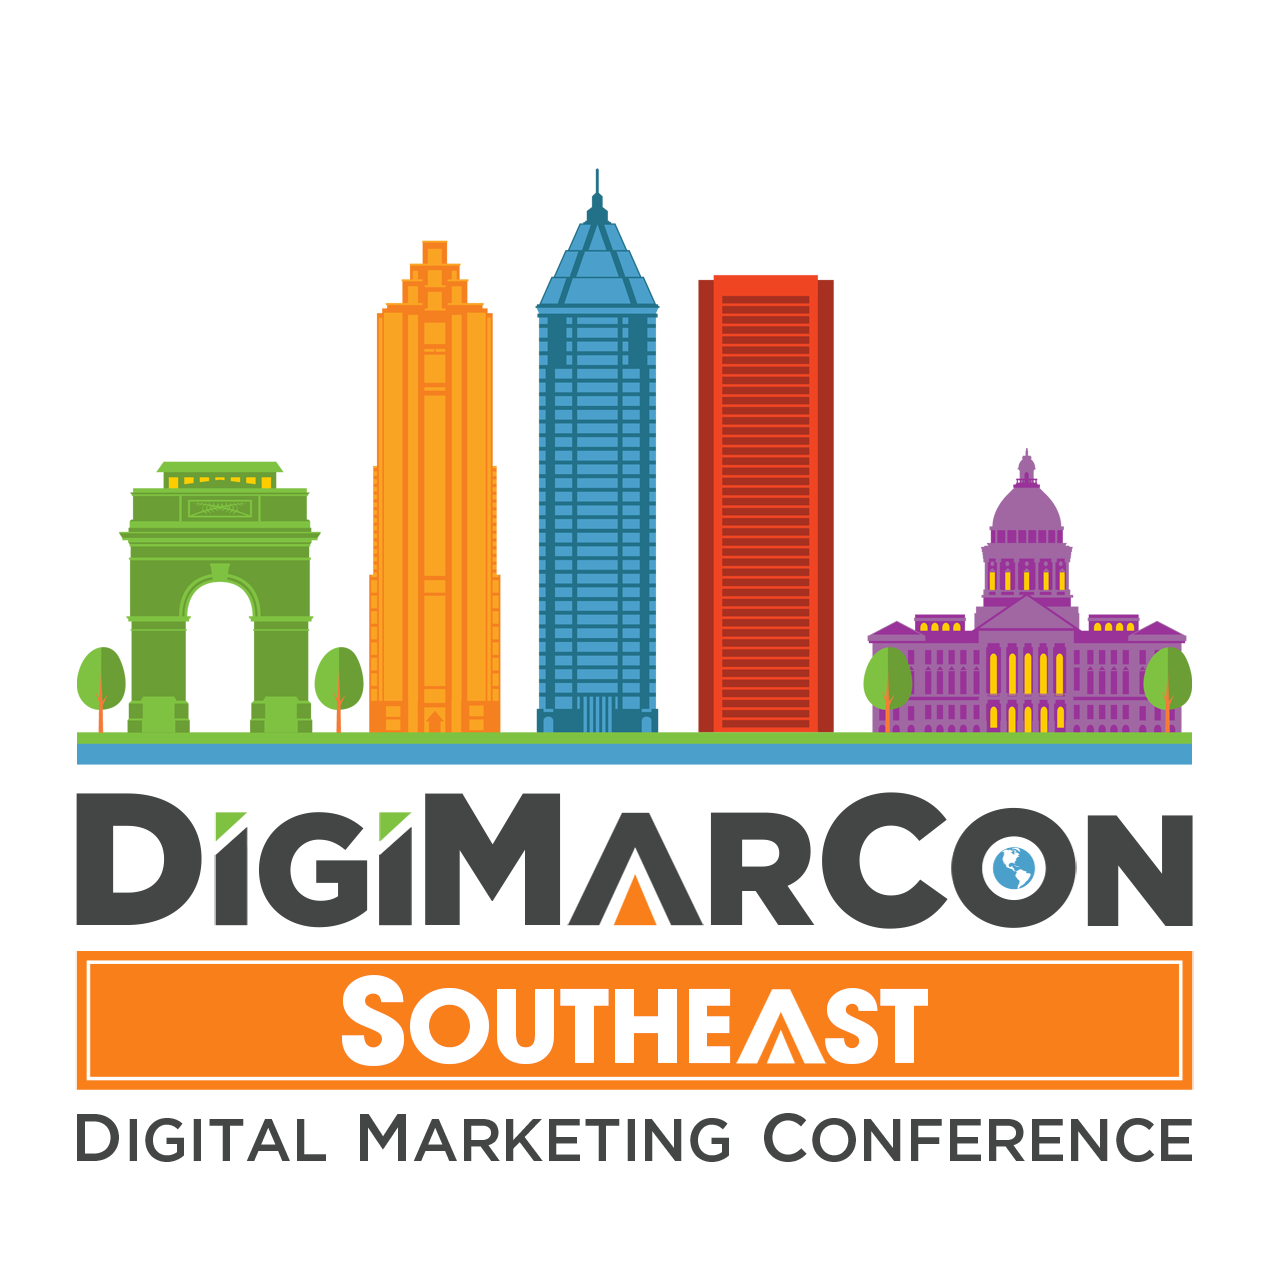 DigiMarCon Southeast 2022 - Digital Marketing, Media and Advertising Conference & Exhibition, Appling, Georgia, United States